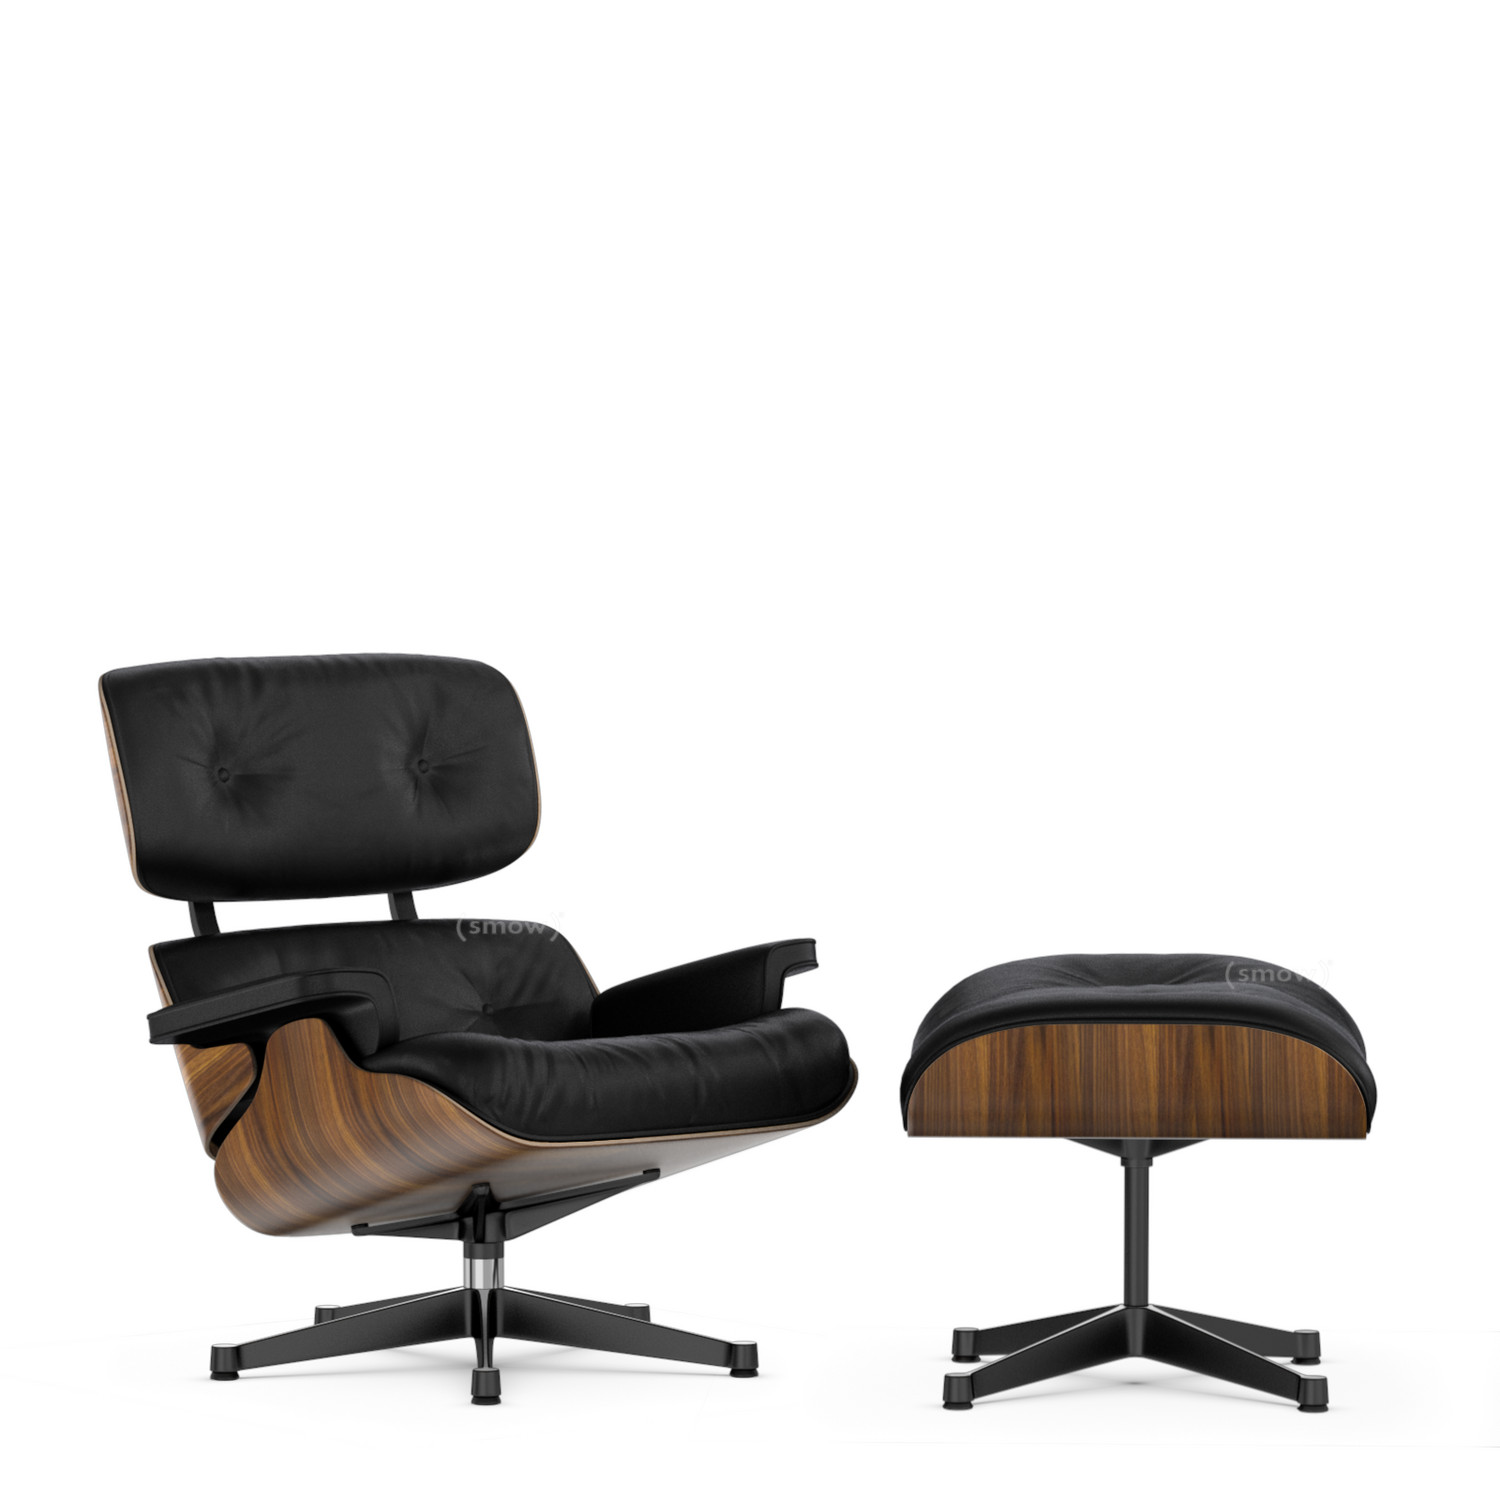 Vitra Lounge Chair Ottoman By Charles, Eames Leather Lounge Chair